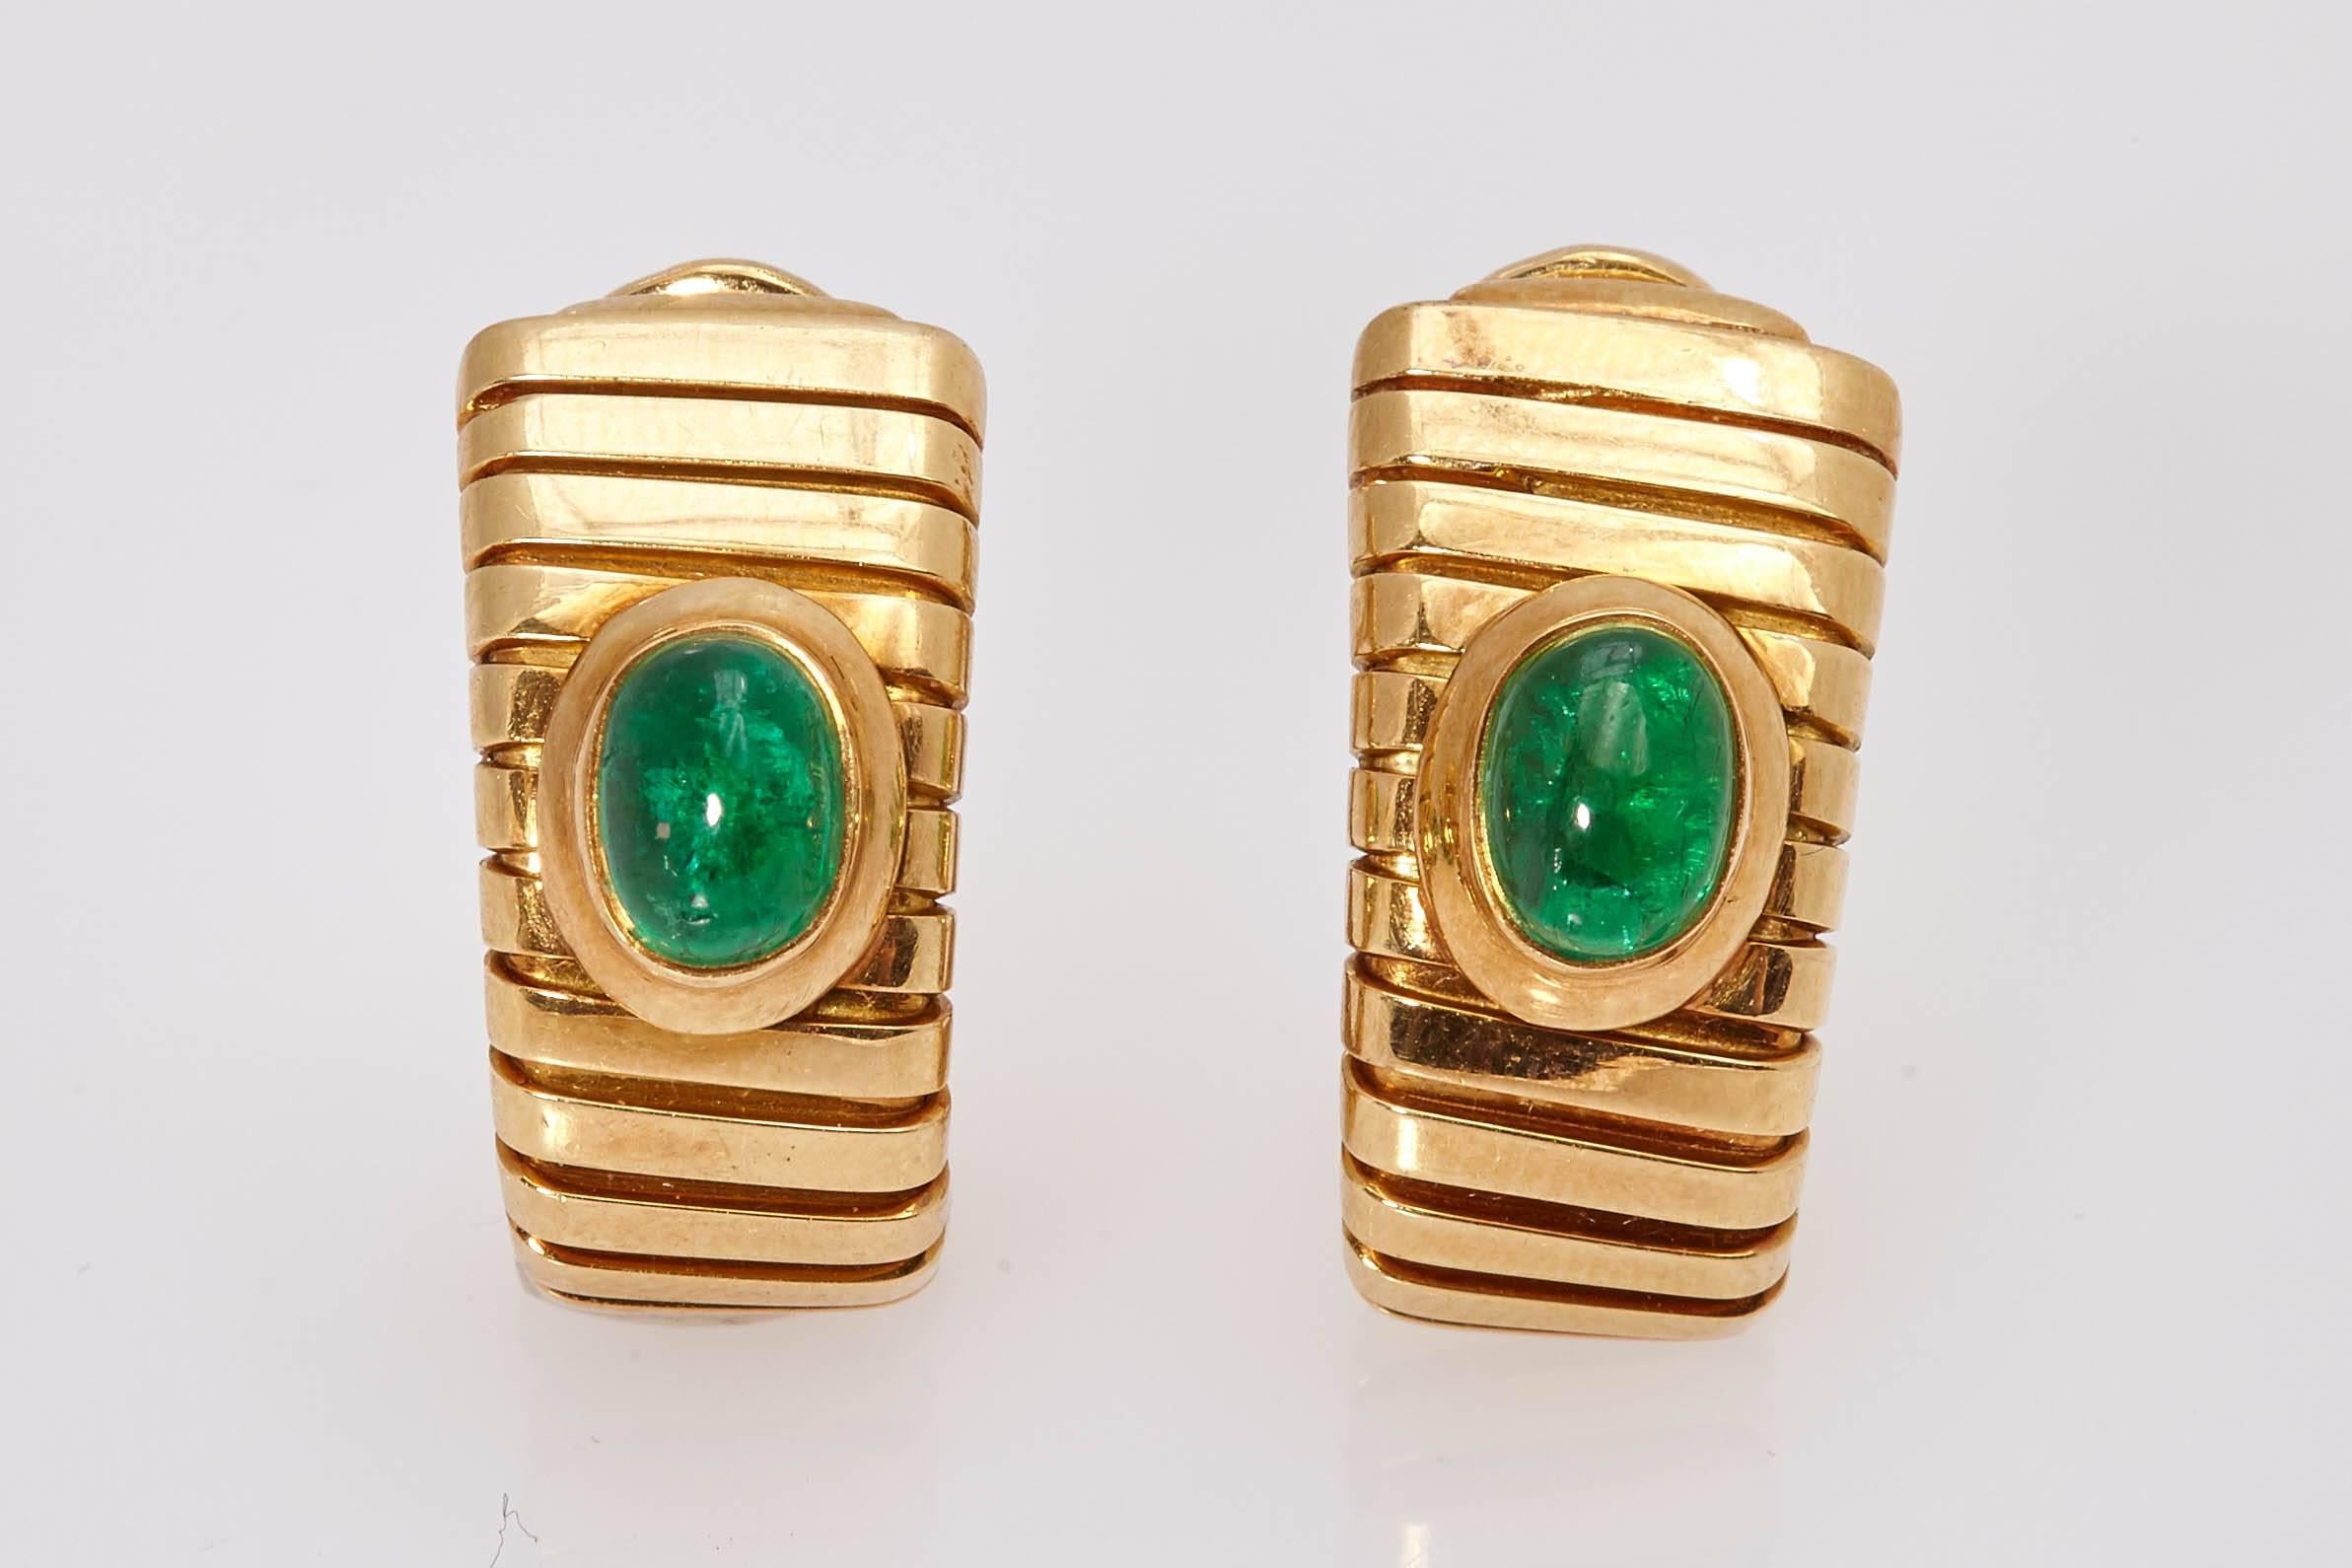 A pair of Bulgari Tubogas earclips, in 18kt yellow gold, showcasing two cabochon emeralds. Made in Italy, circa 1975 